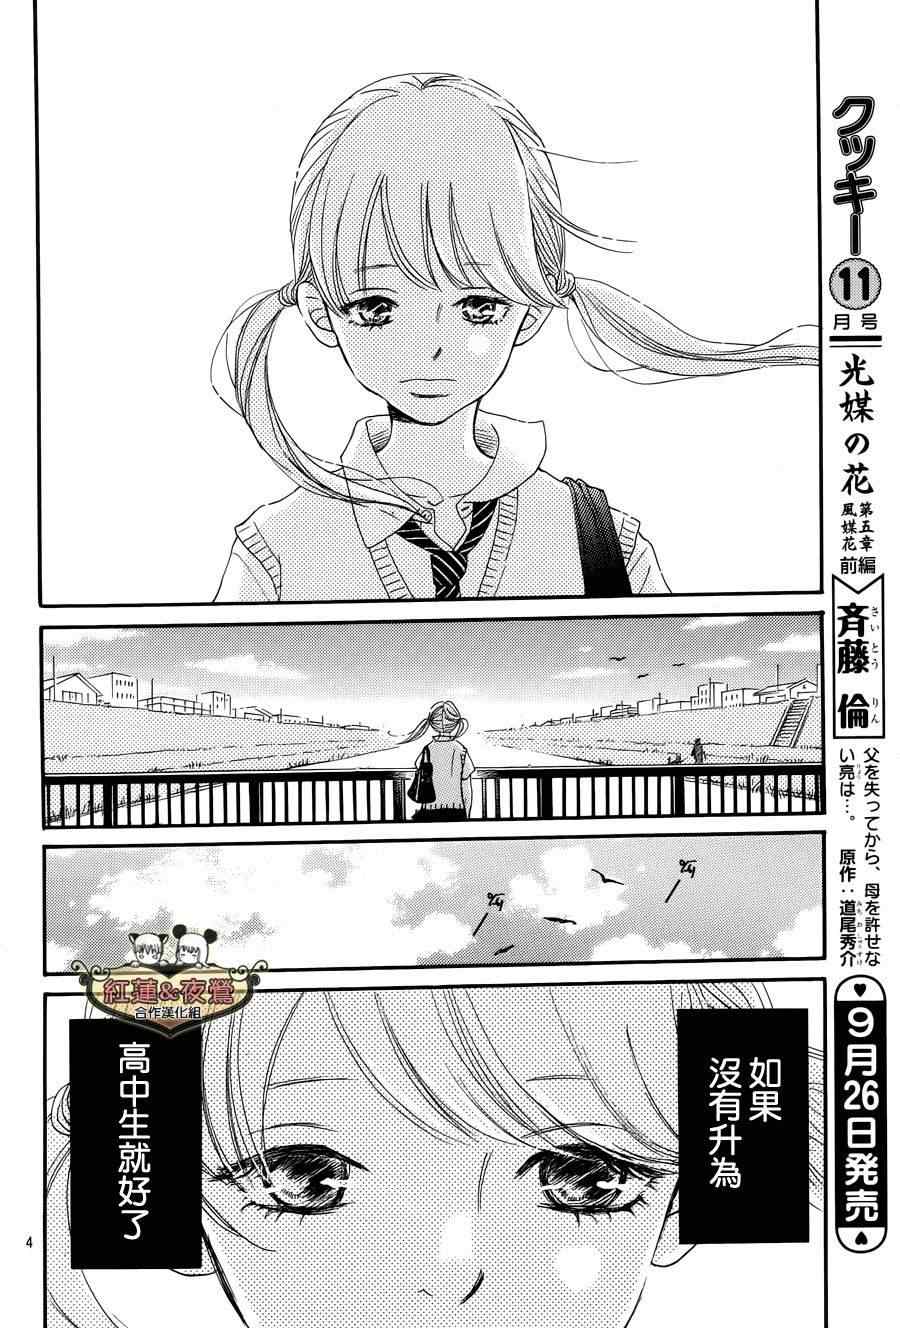 《Forget-Me-Not》漫画 001集